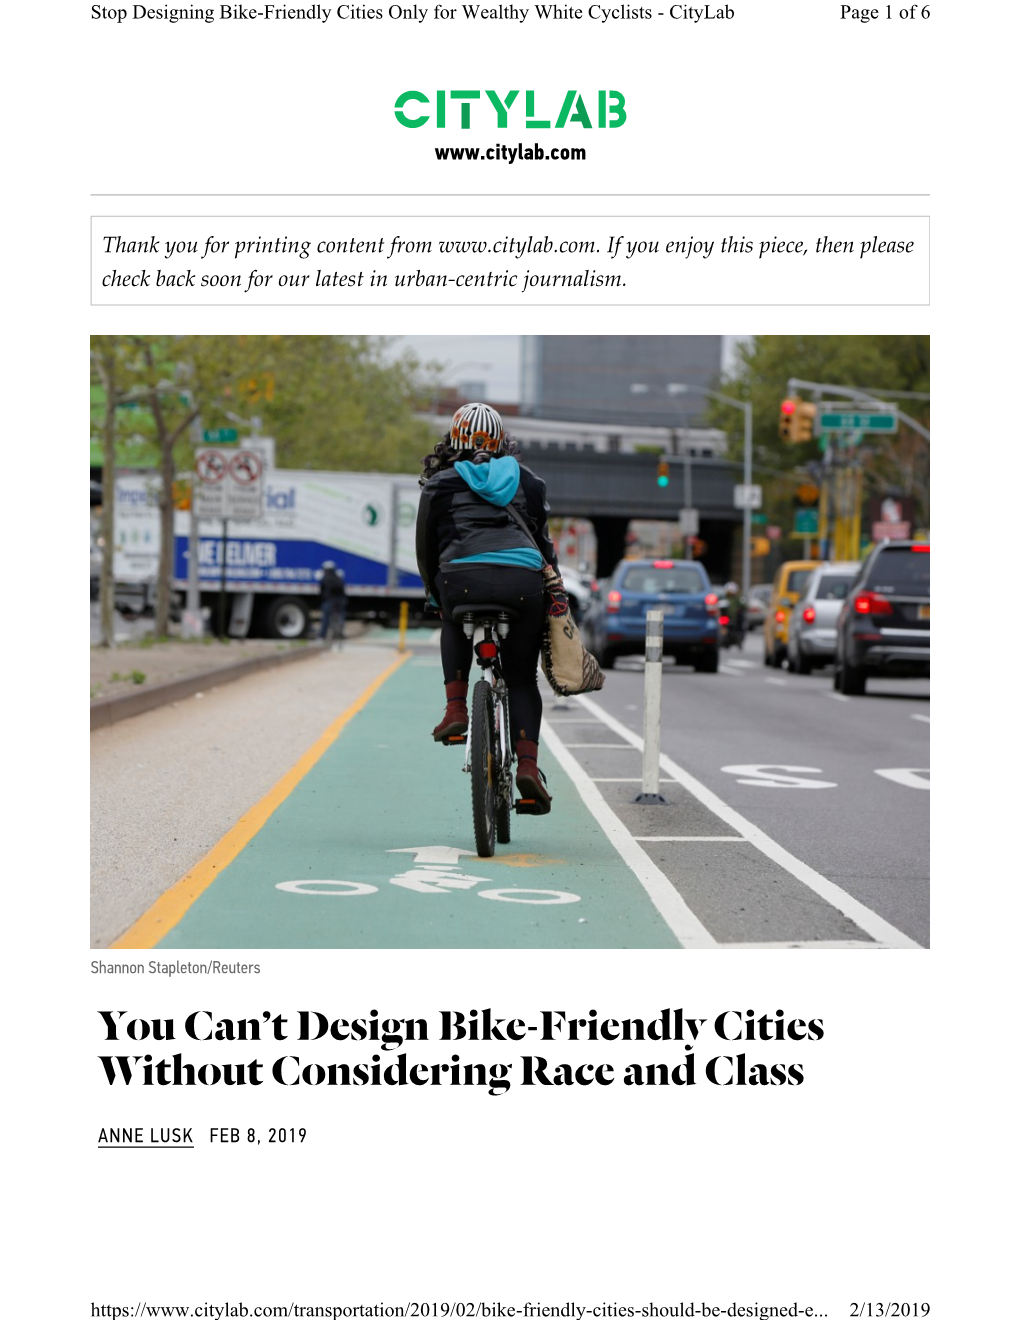 You Can't Design Bike-Friendly Cities Without Considering Race and Class